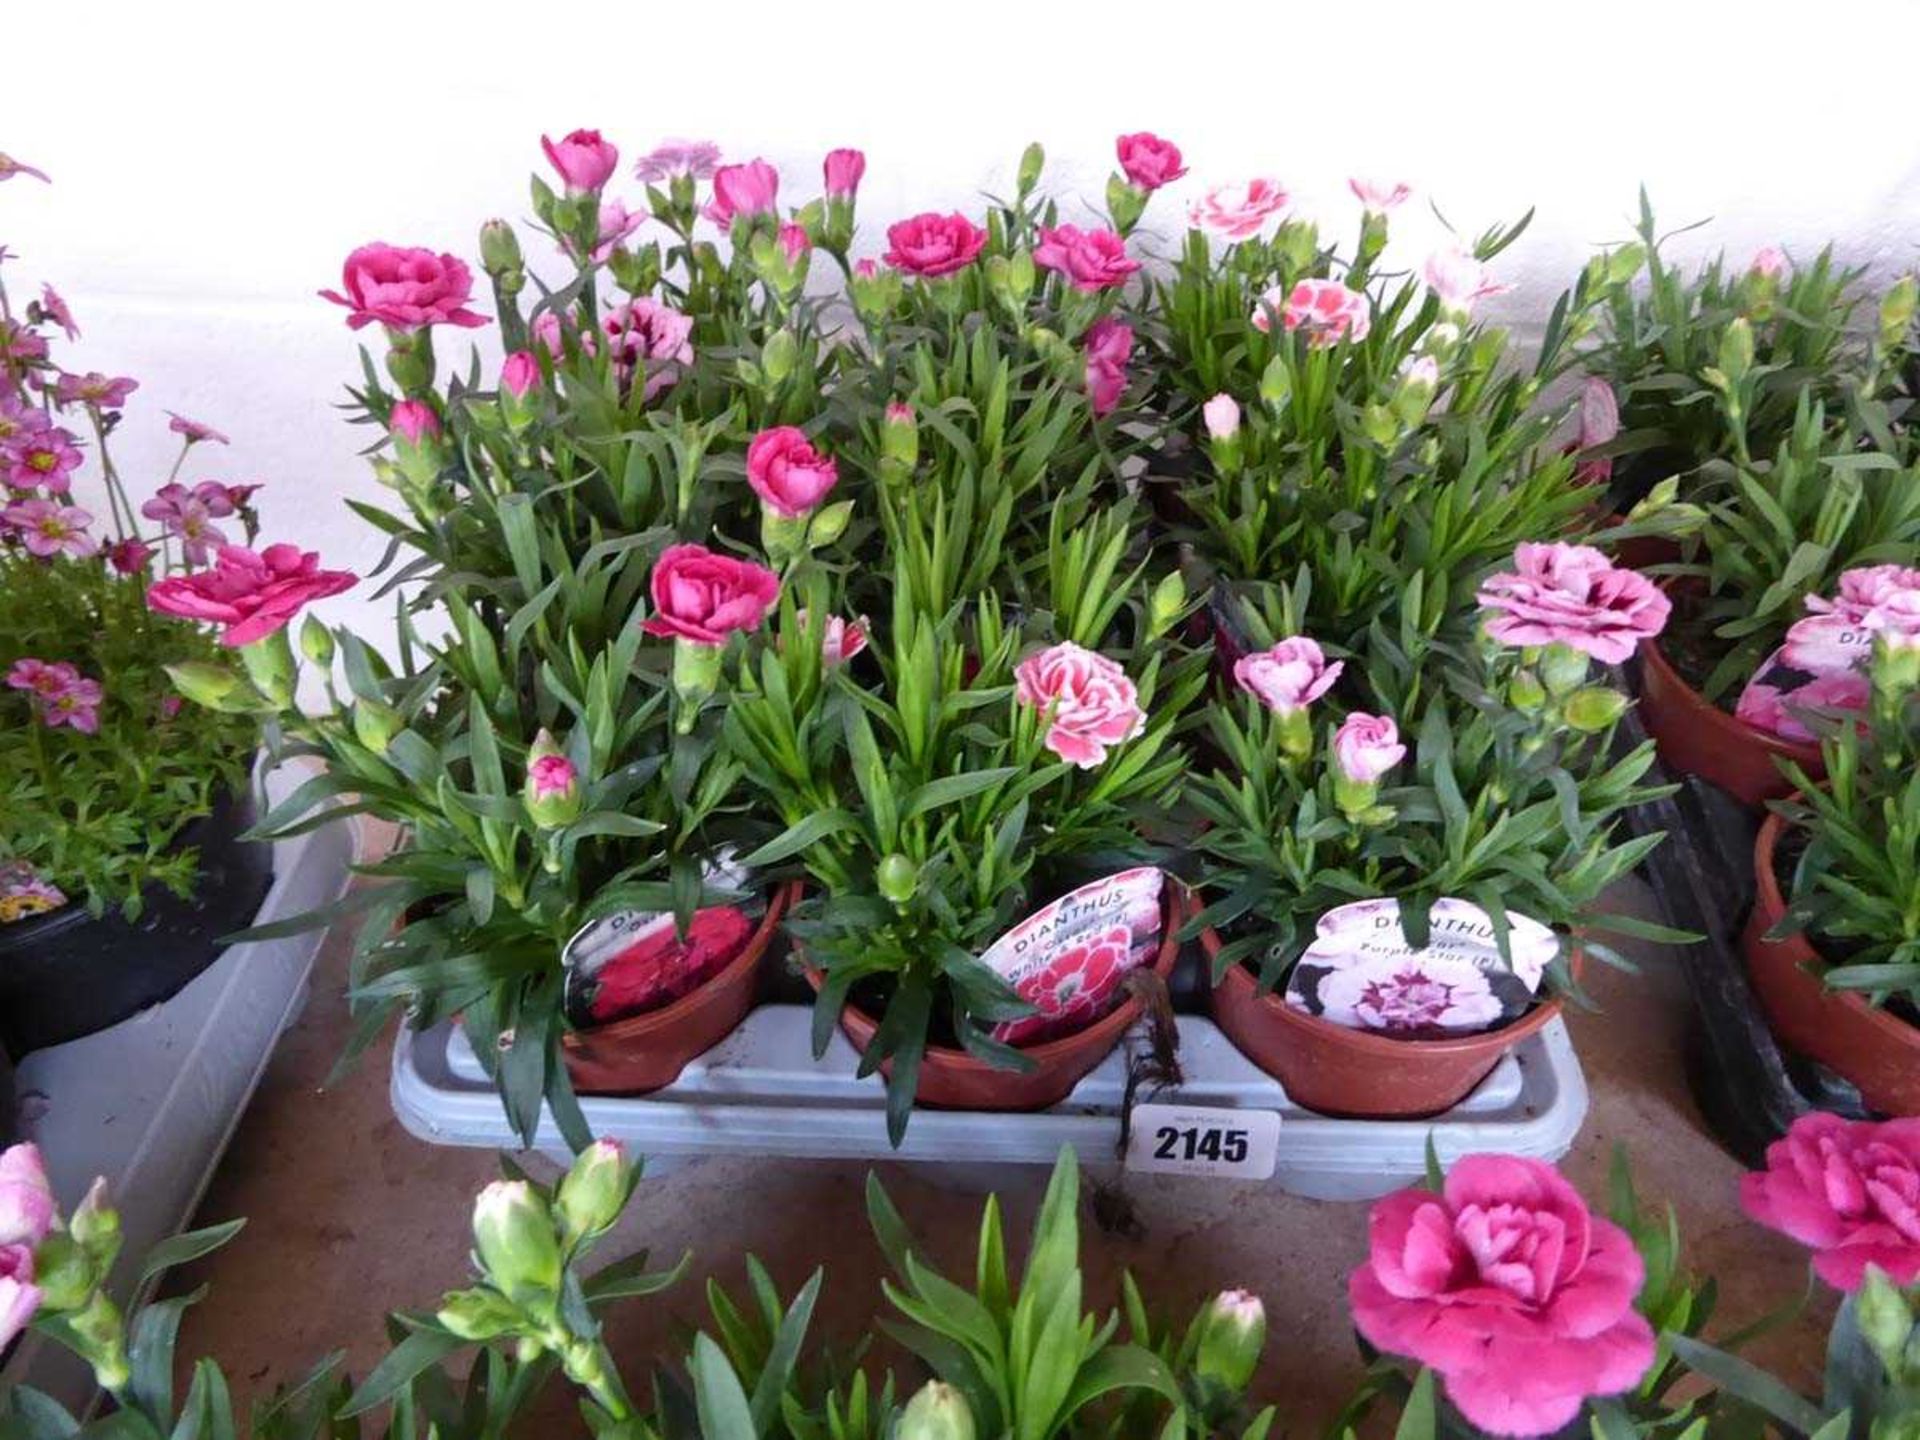 Tray containing 9 pots of white and red Oscar dianthus